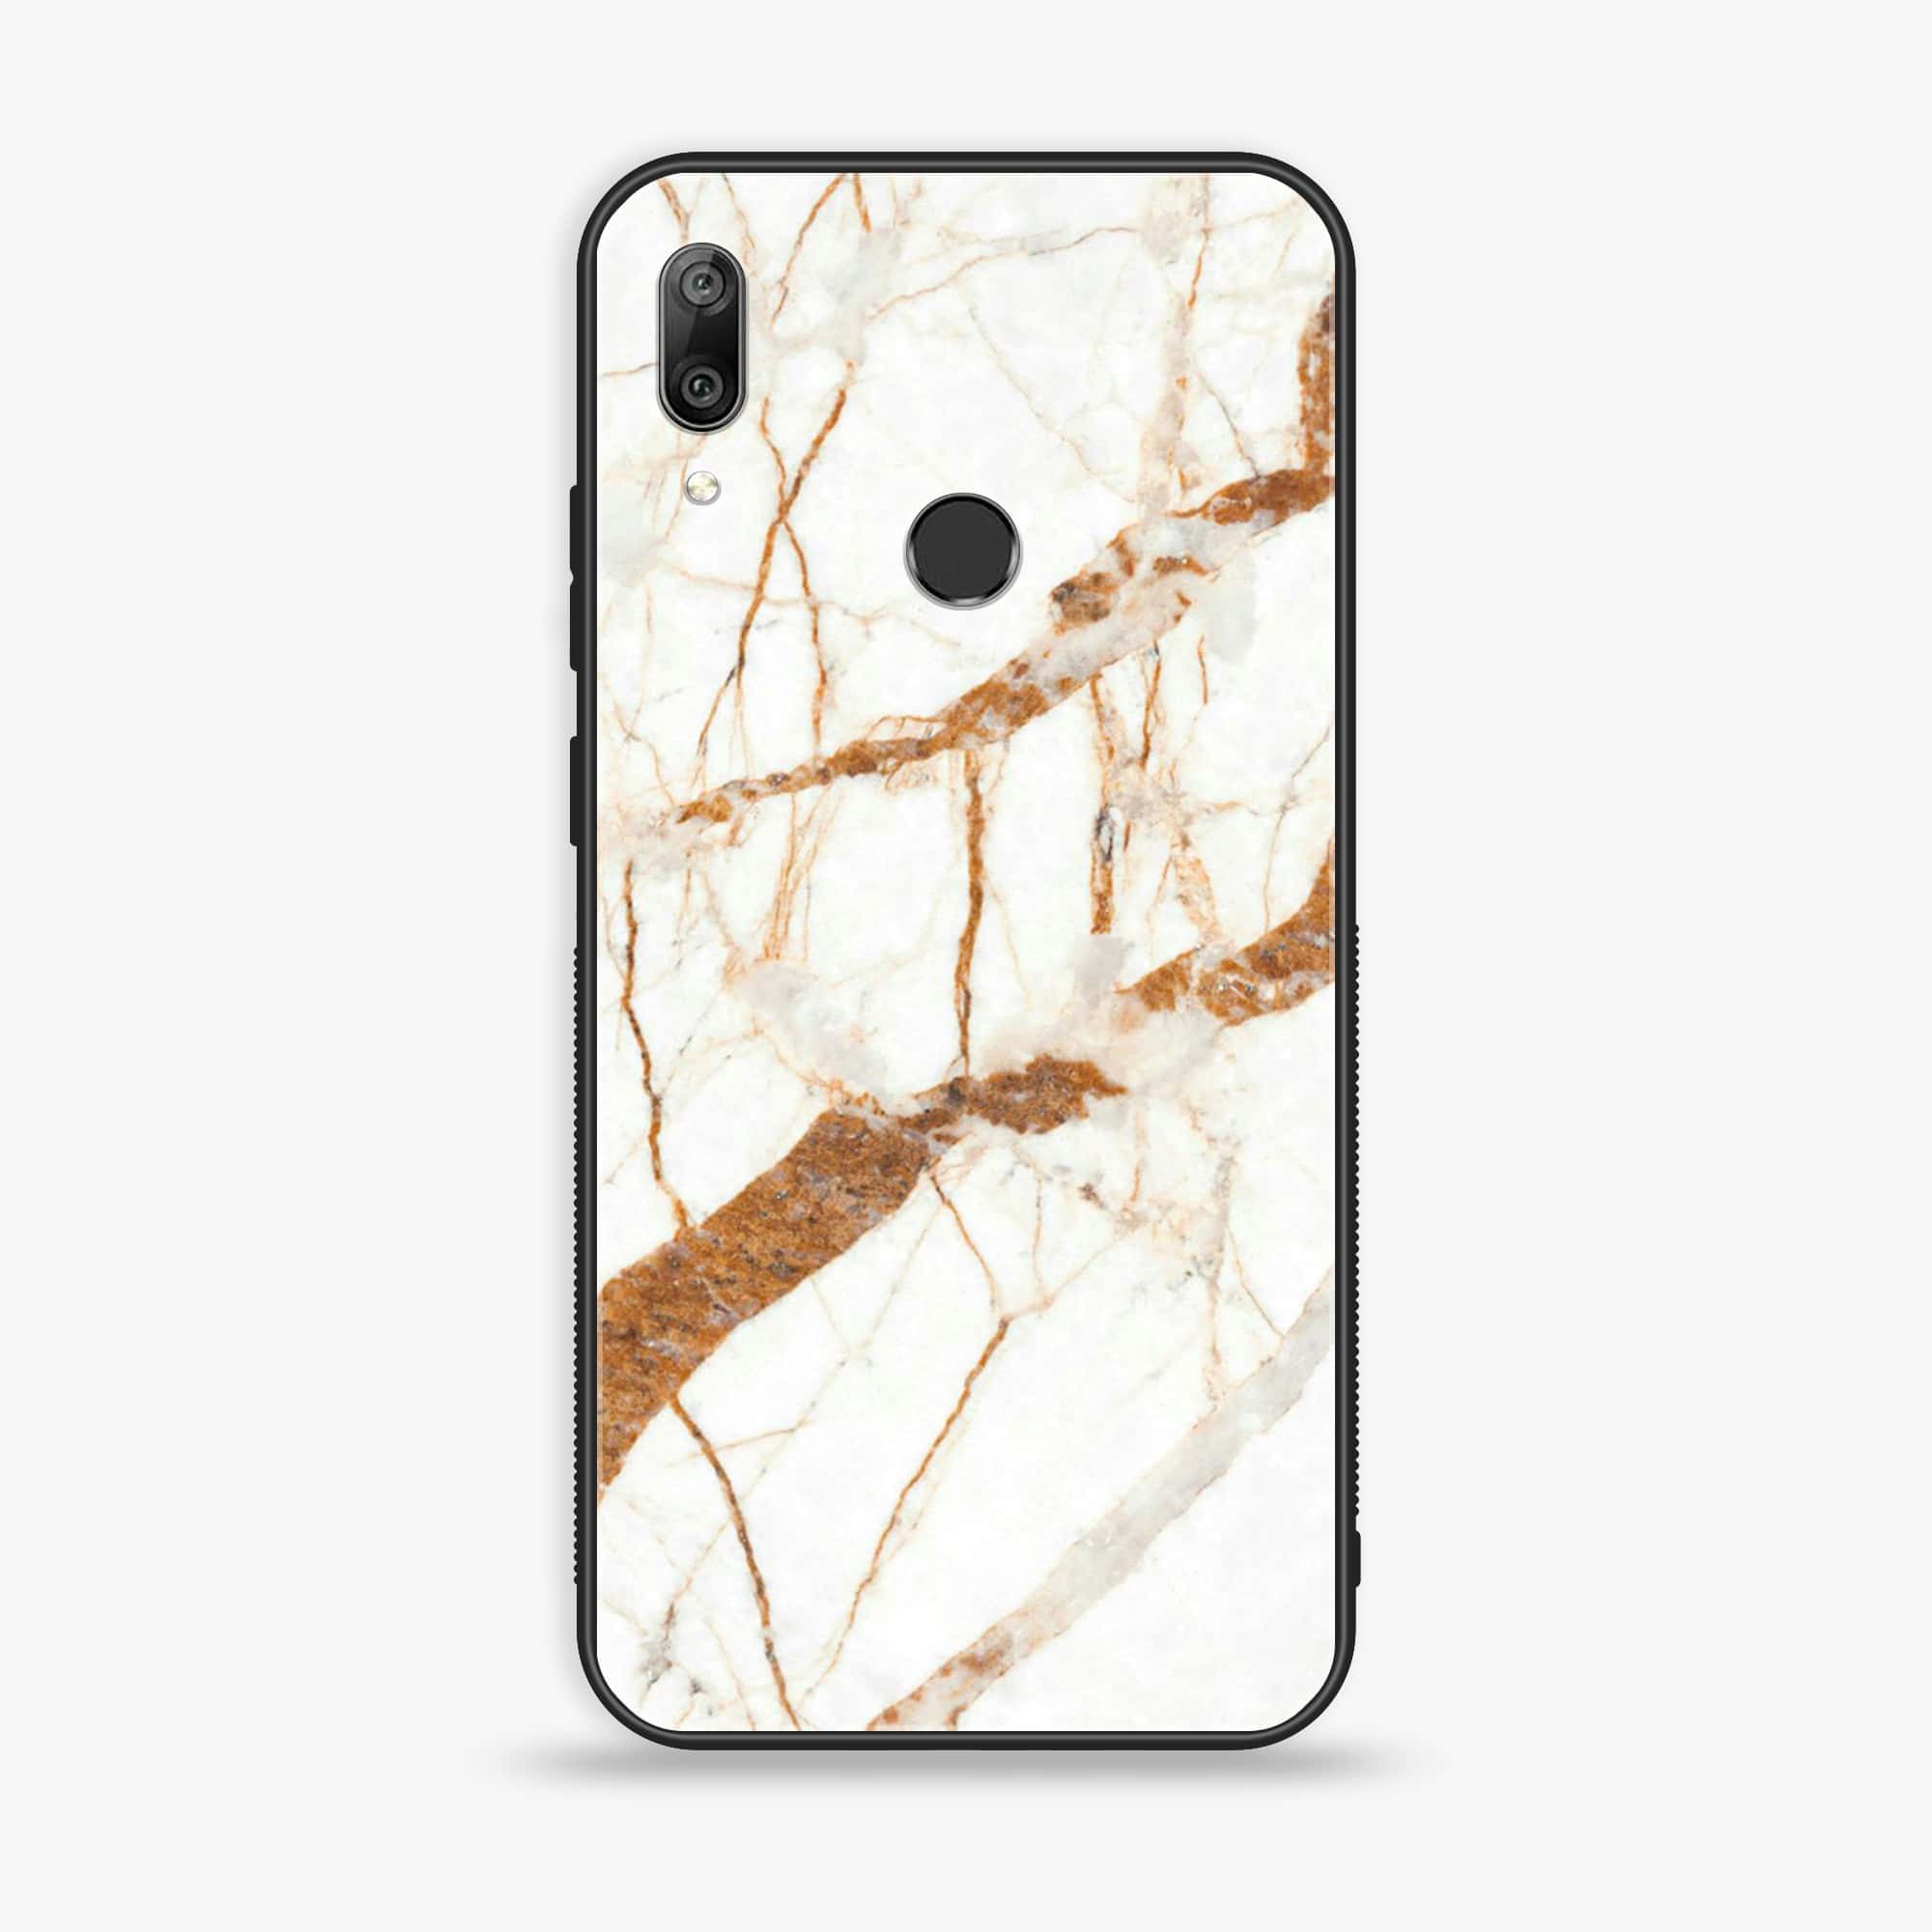 Huawei Y7 Prime (2019) - White Marble Series - Premium Printed Glass soft Bumper shock Proof Case